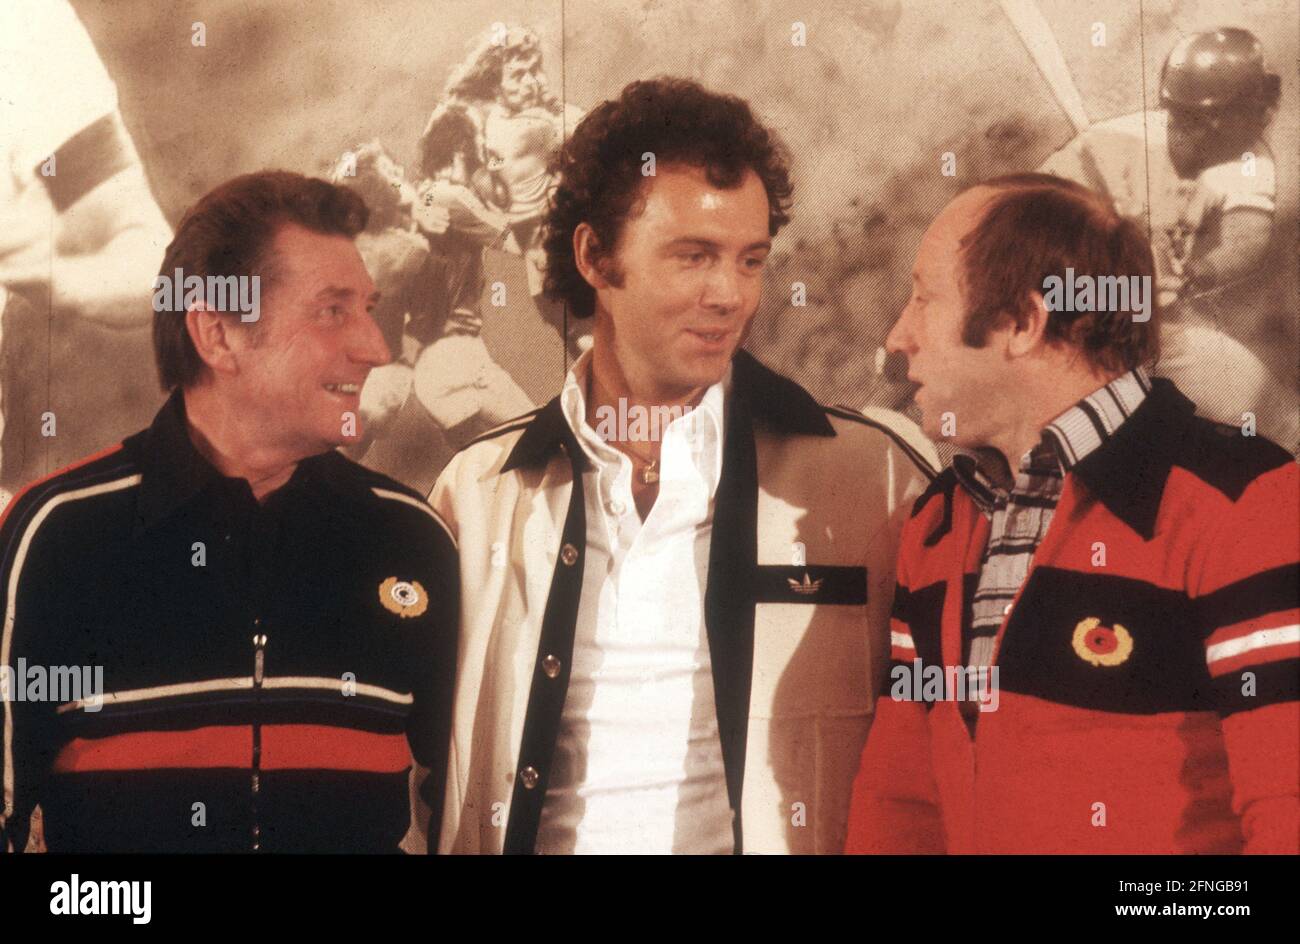 Franz Beckenbauer (centre) at a press conference held by Adidas in Herzogenaurach with Fritz Walter (left) and Uwe Seeler on 17.11.1977. [automated translation] Stock Photo